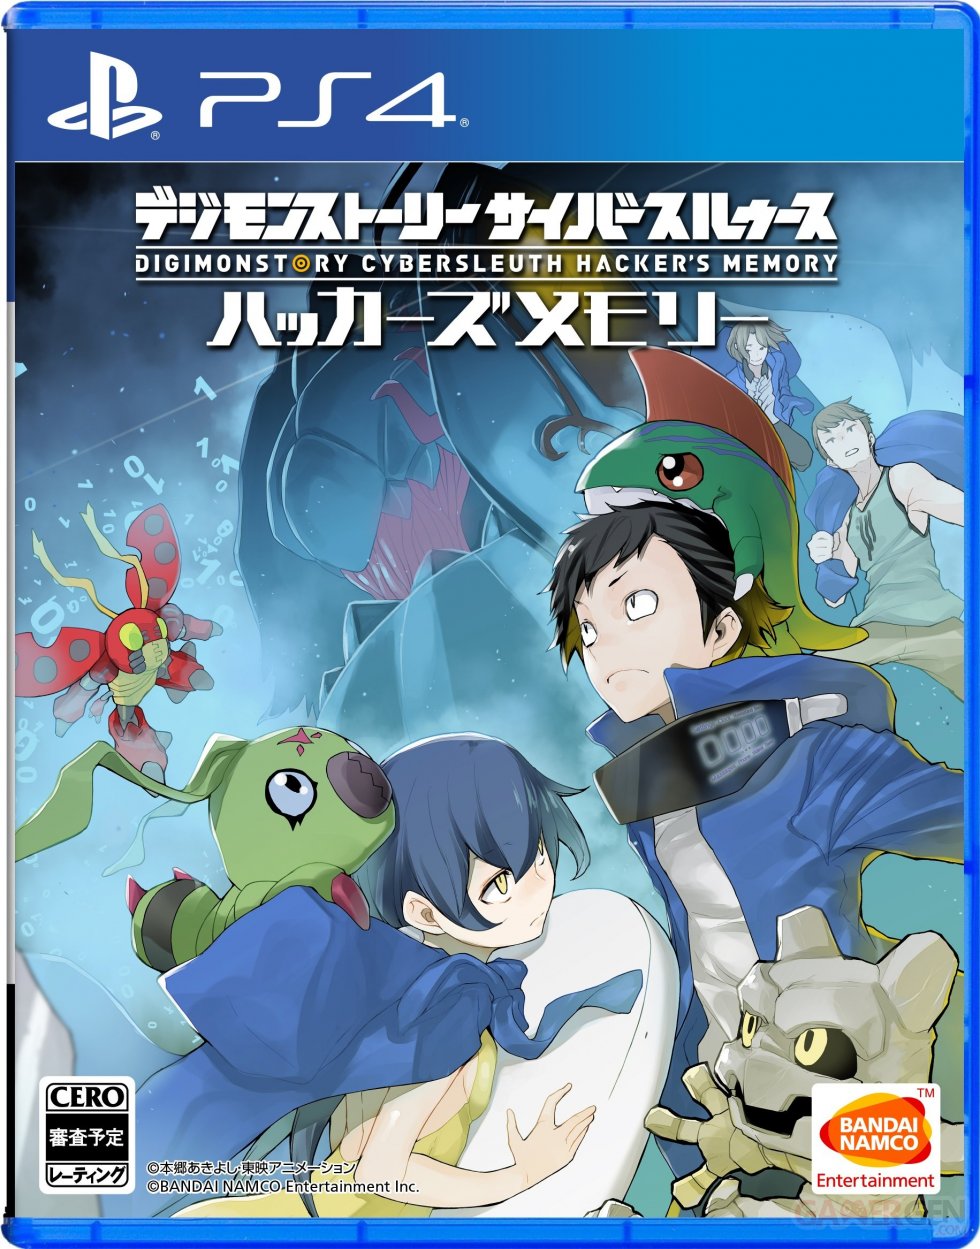 Digimon-Story-Cyber-Sleuth-Hackers-Memory-jaquette-jp-ps4-21-07-2017